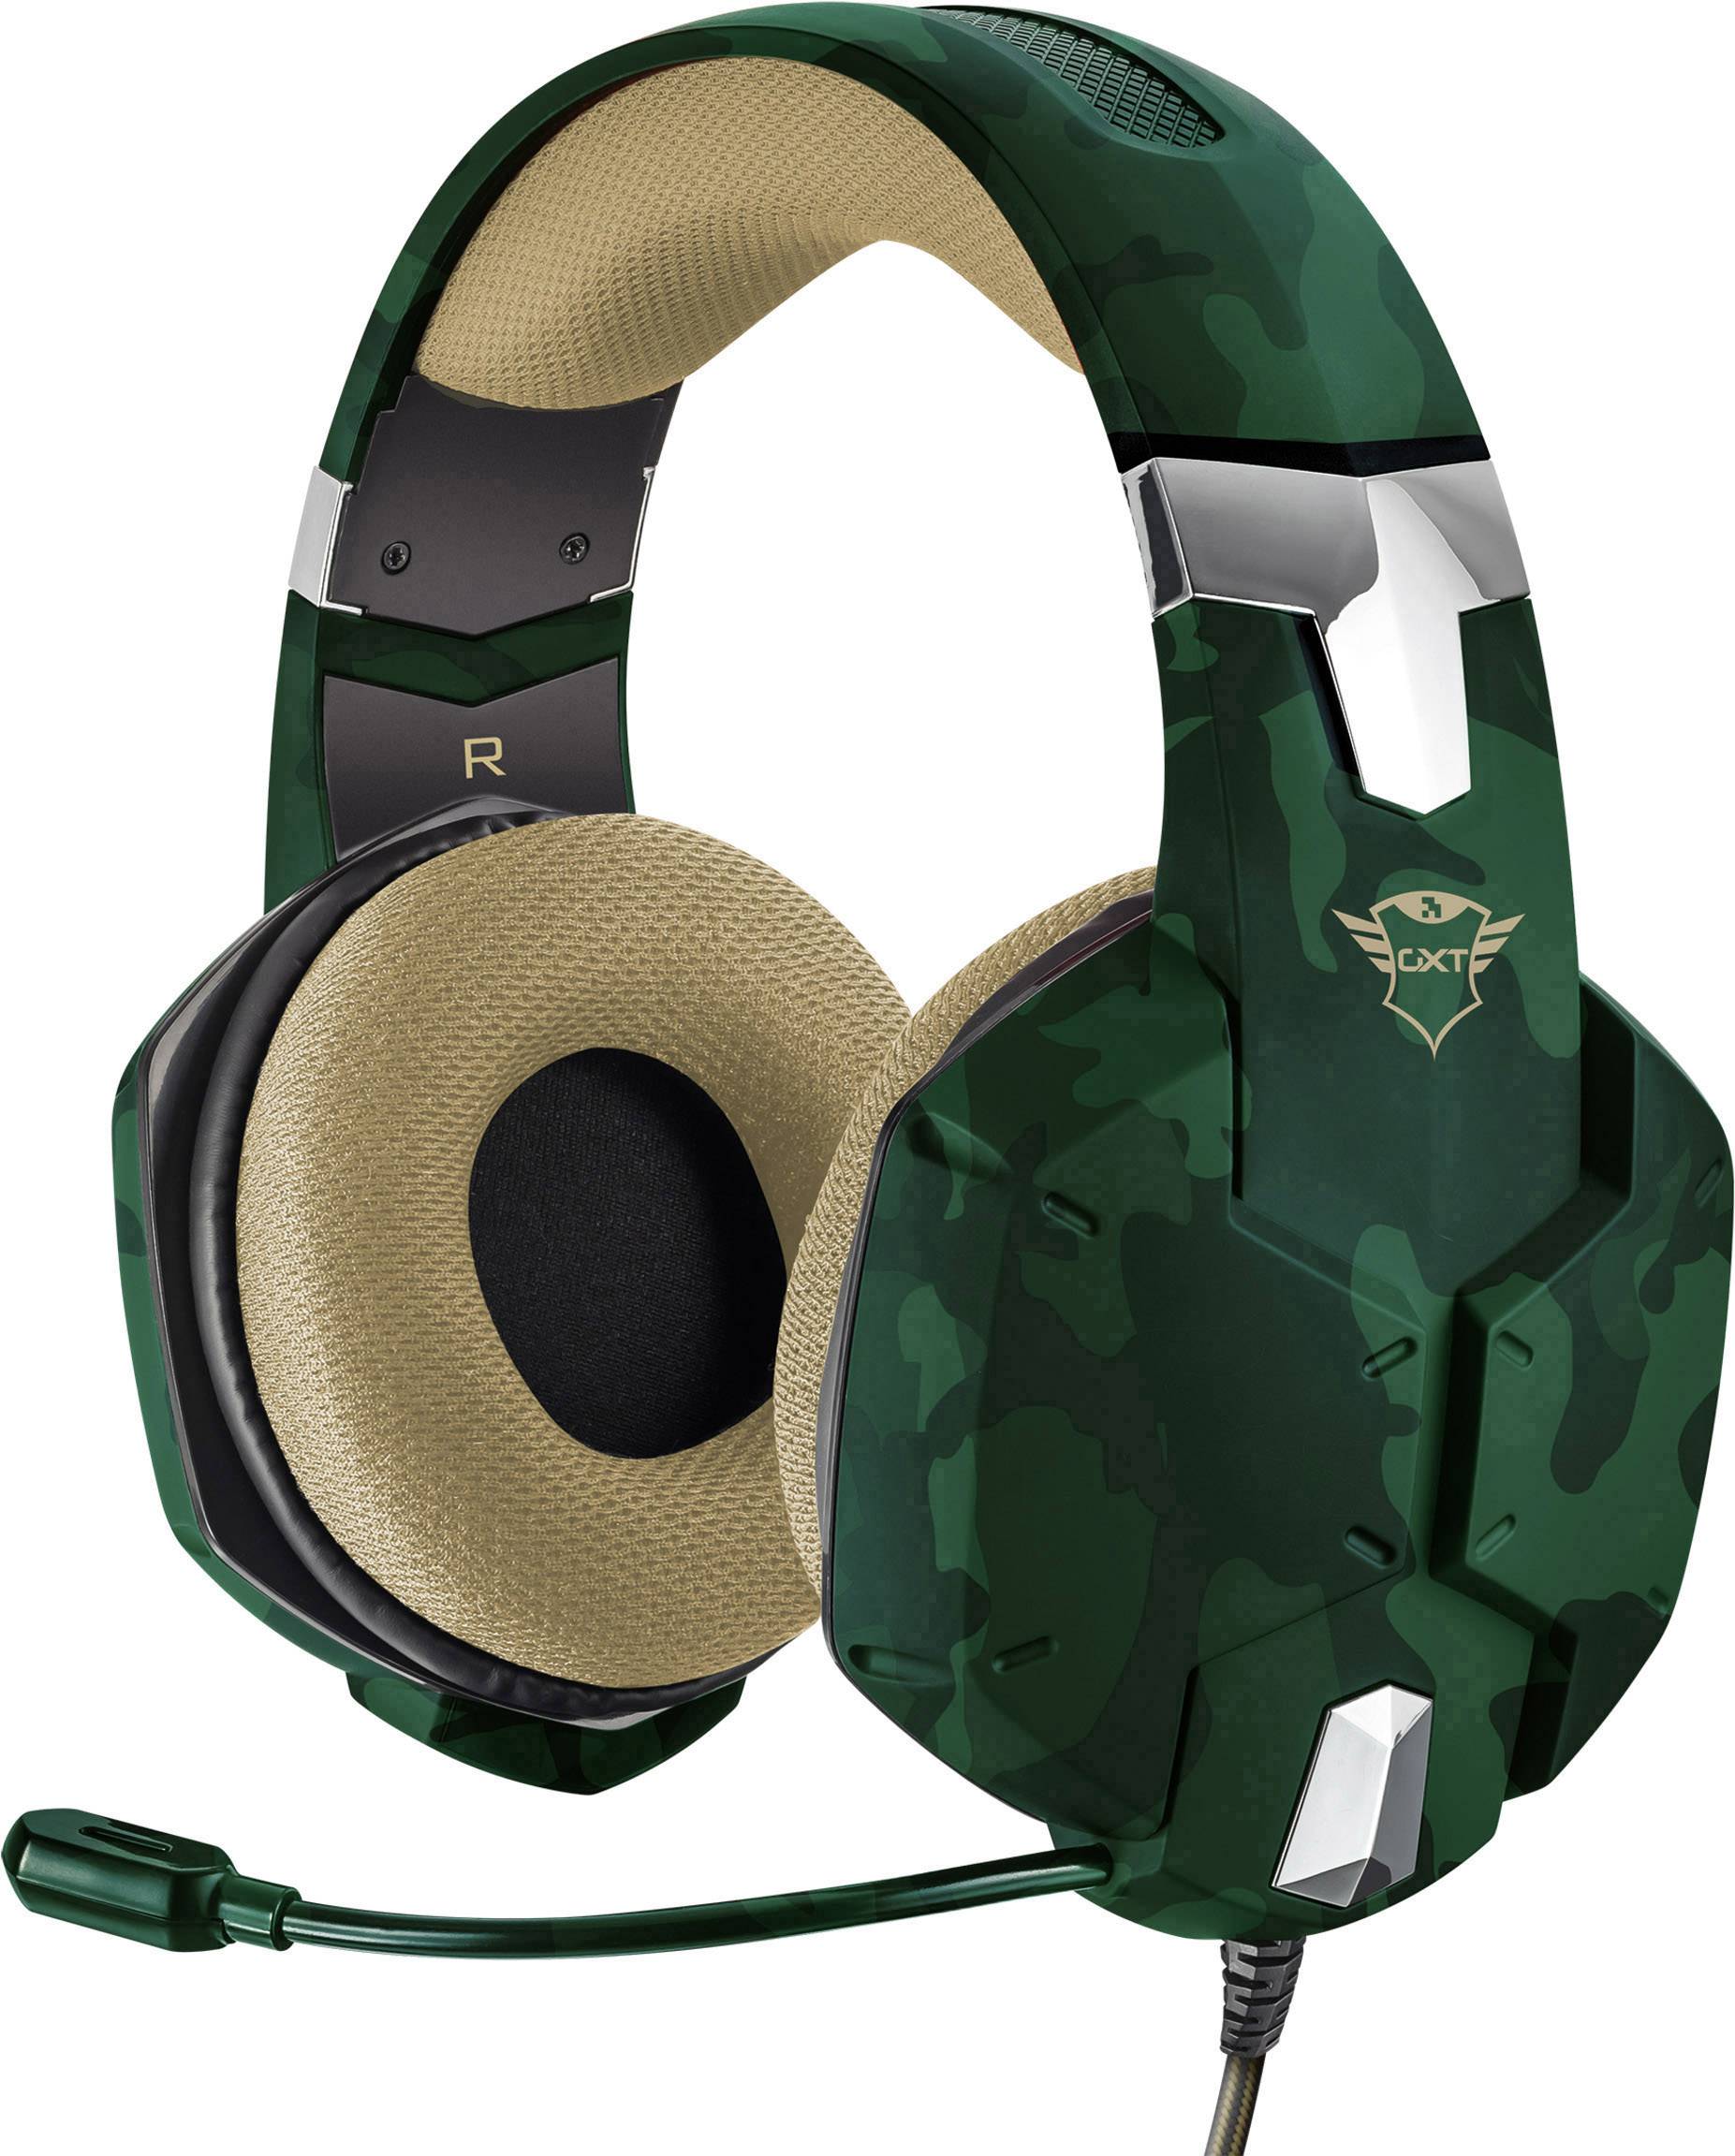 Trust Gxt 322c Gaming Headset 3 5 Mm Jack Corded Stereo Over The Ear Green Camouflage Conrad Com